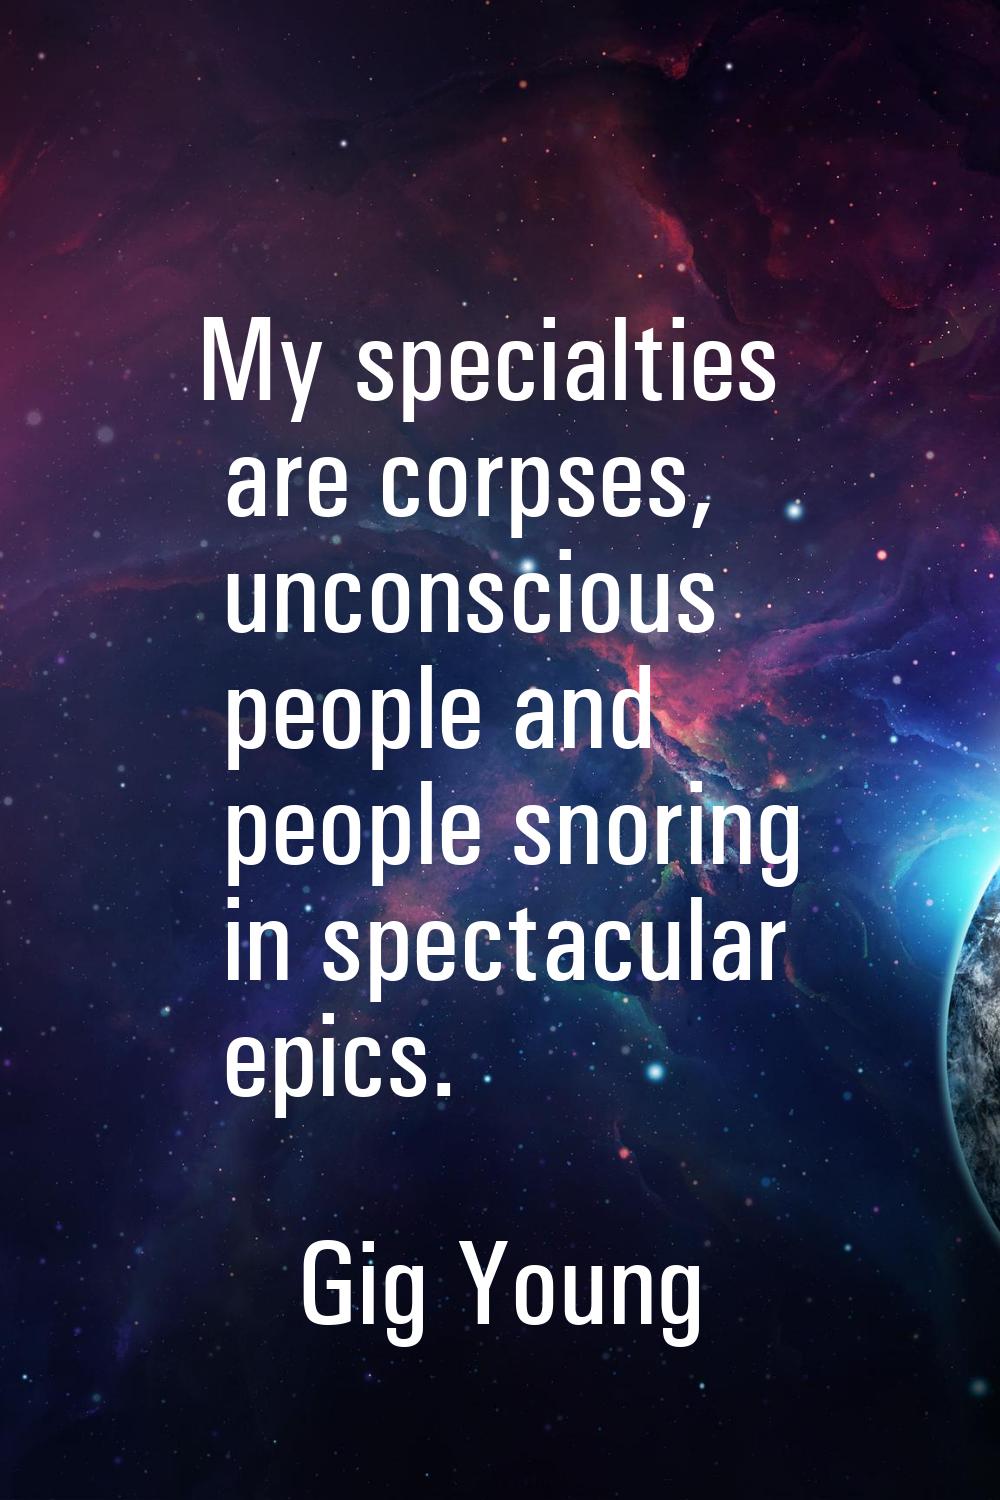 My specialties are corpses, unconscious people and people snoring in spectacular epics.